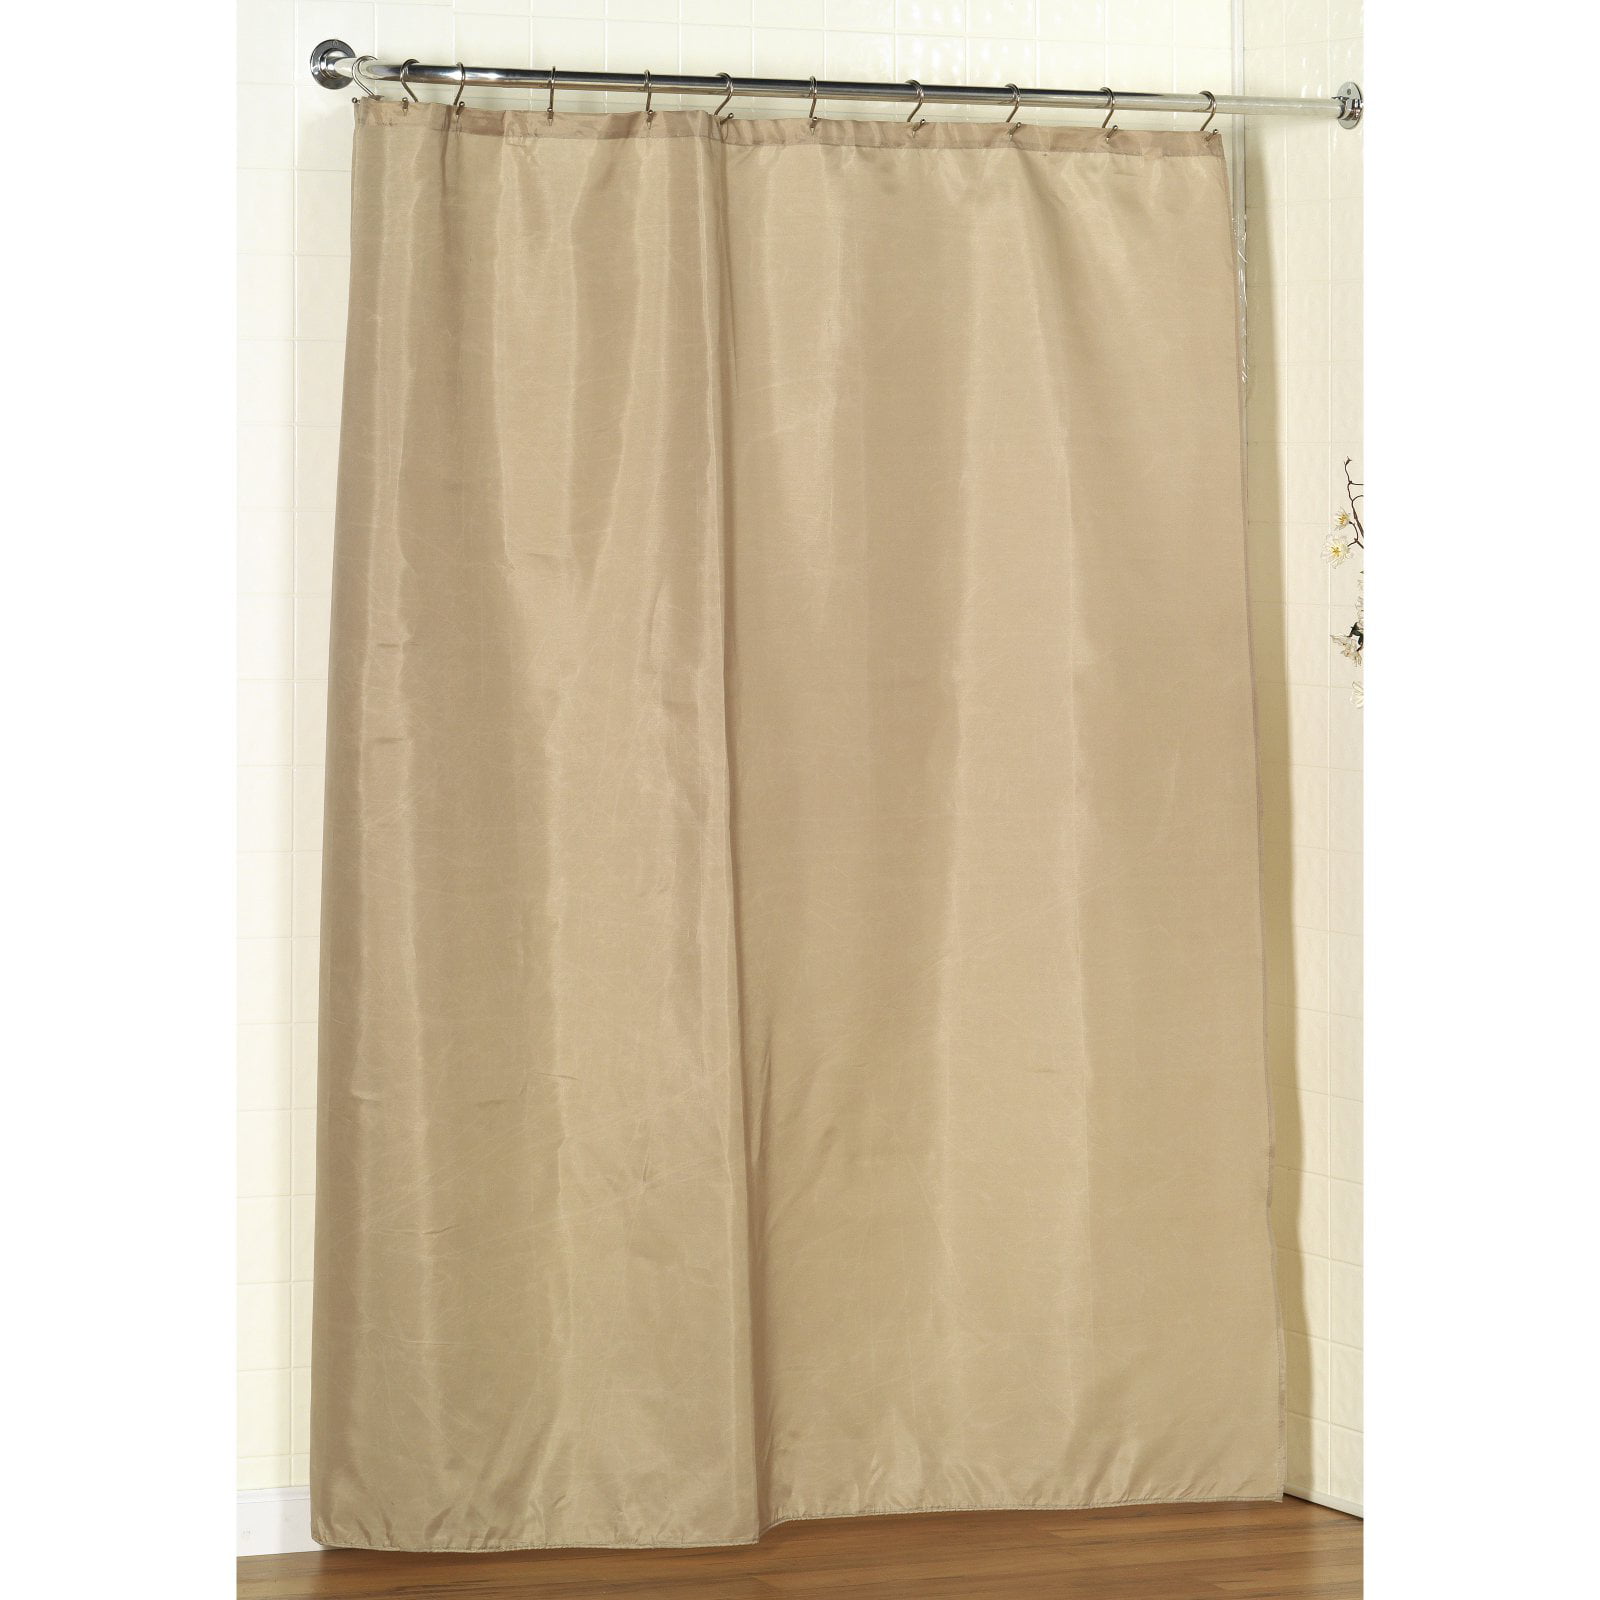 Standard-Sized Polyester Fabric Shower Curtain Liner in Linen - Walmart.com